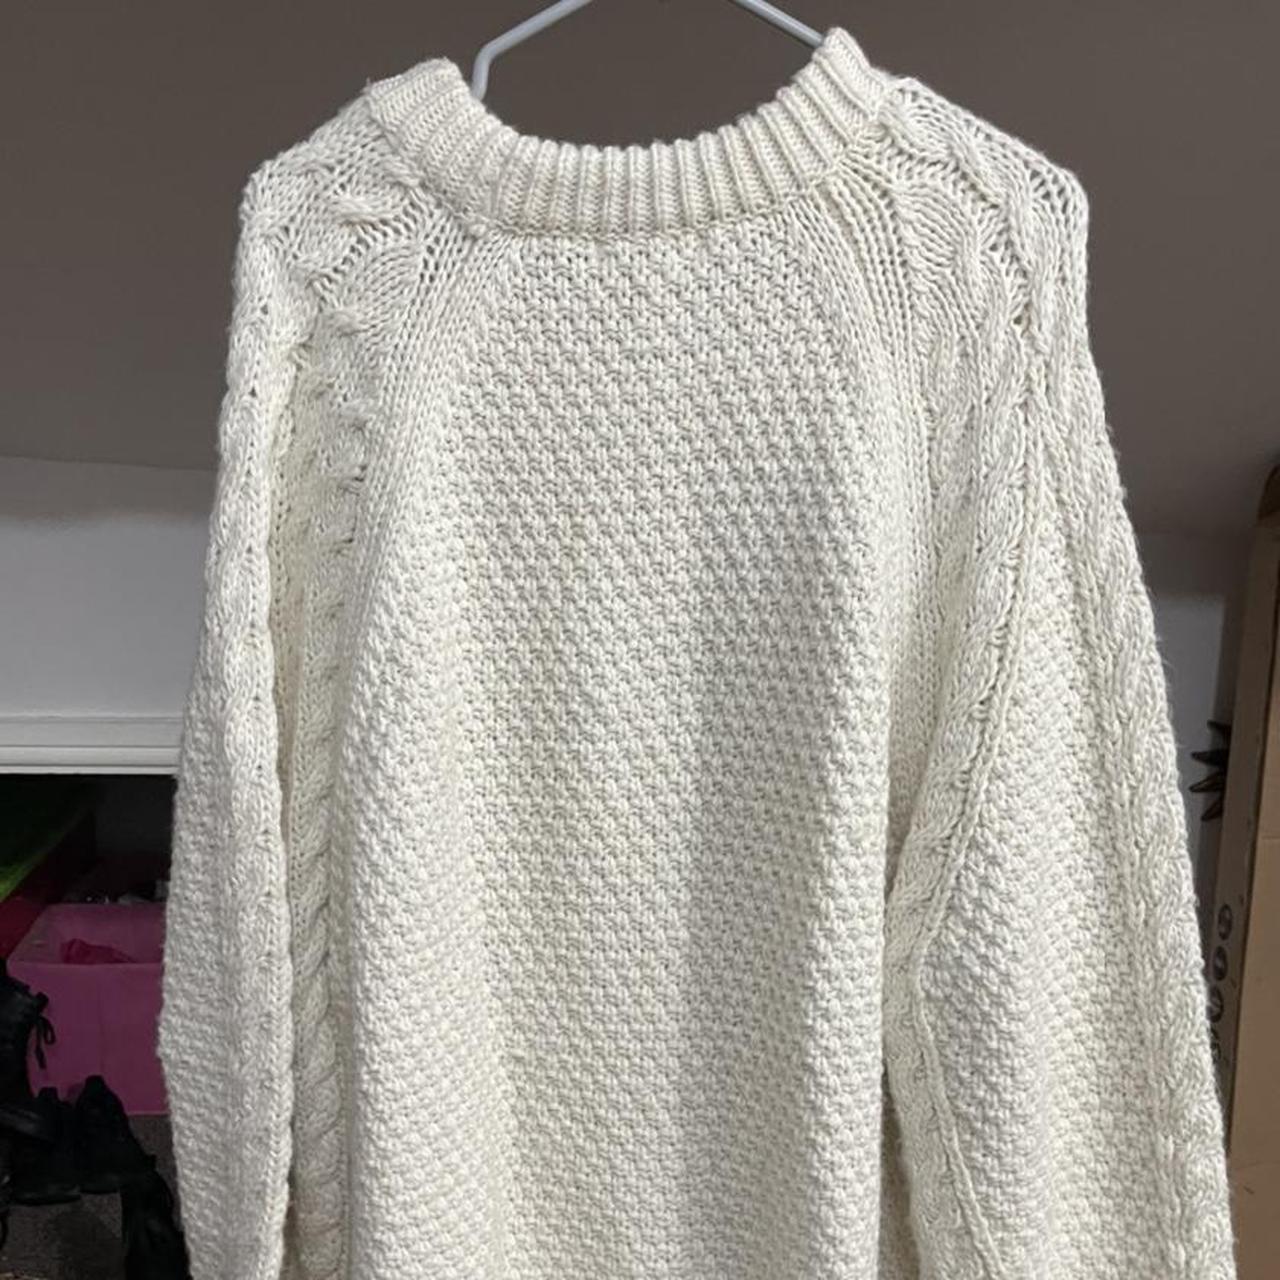 super warm and thick cable knit jumper PLEASE... - Depop